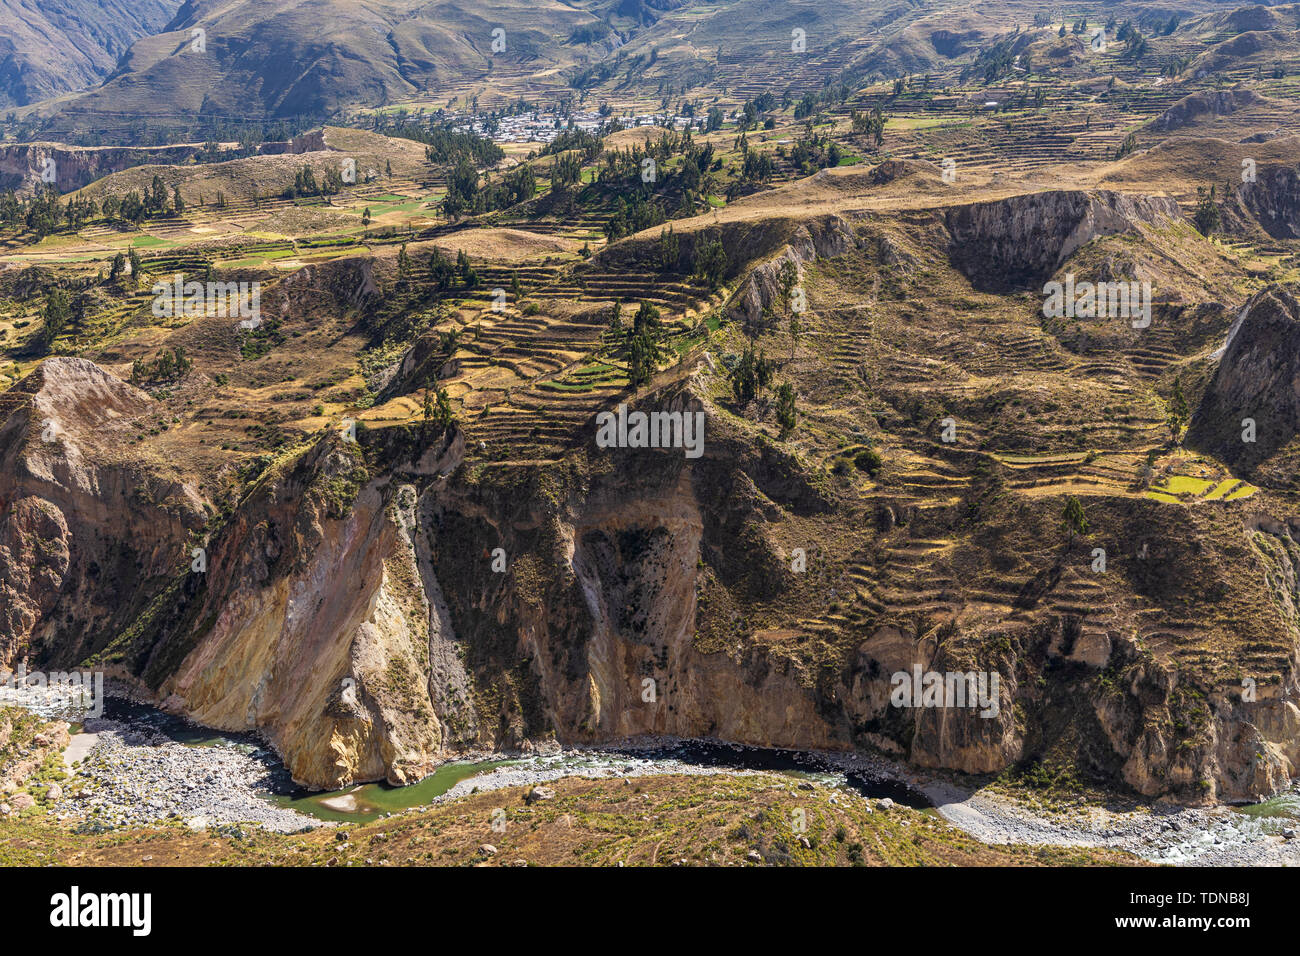 Agricultural terraces in the Colca Canyon, valley viewed from the Mirador Antahuilque, Peru, South America. Stock Photo